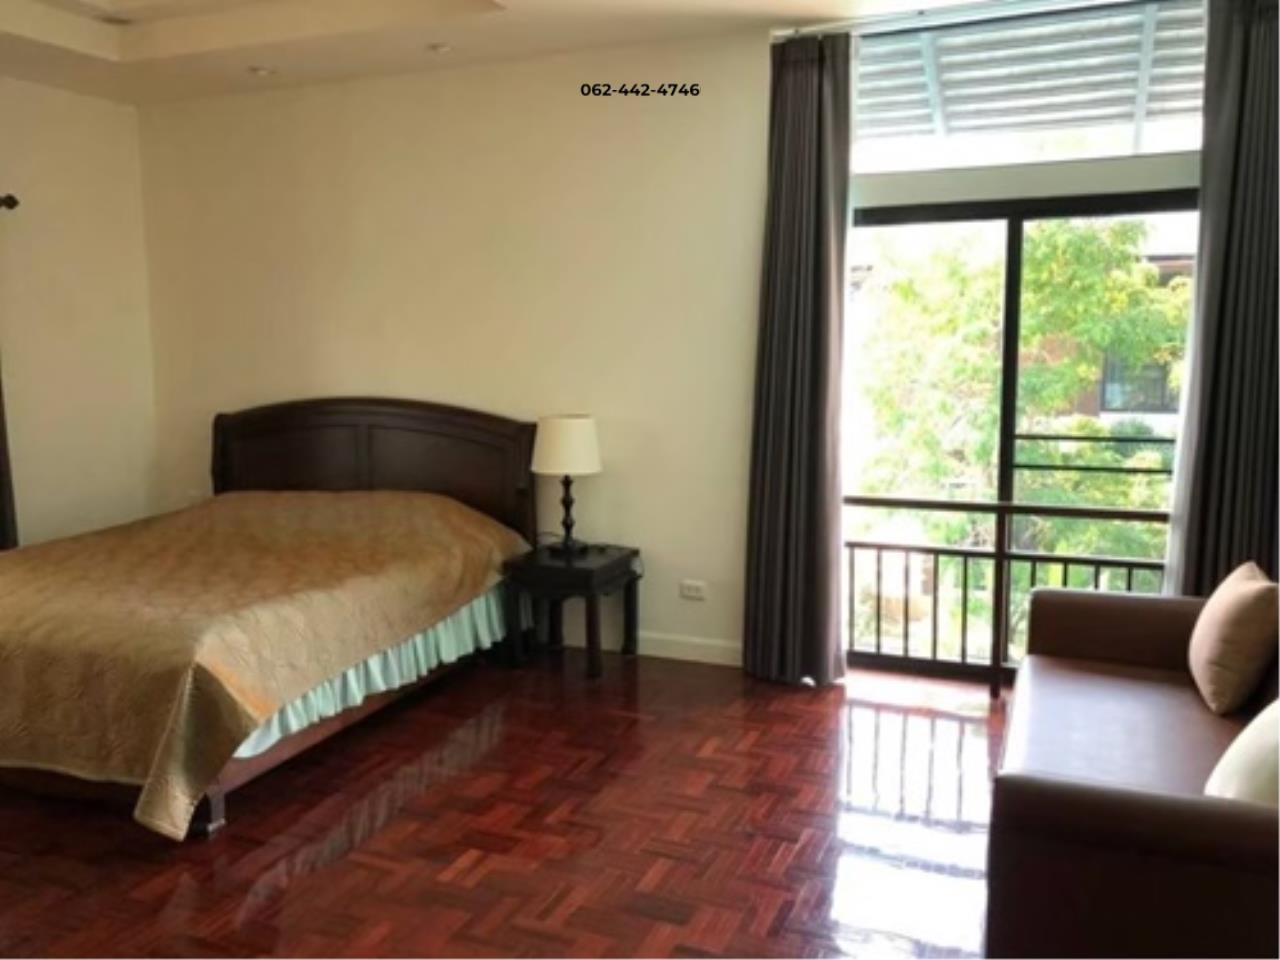 Jangproperty Agency's PUH_00161 House for rent Lanna Montra Hang Dong Chiang Mai  6